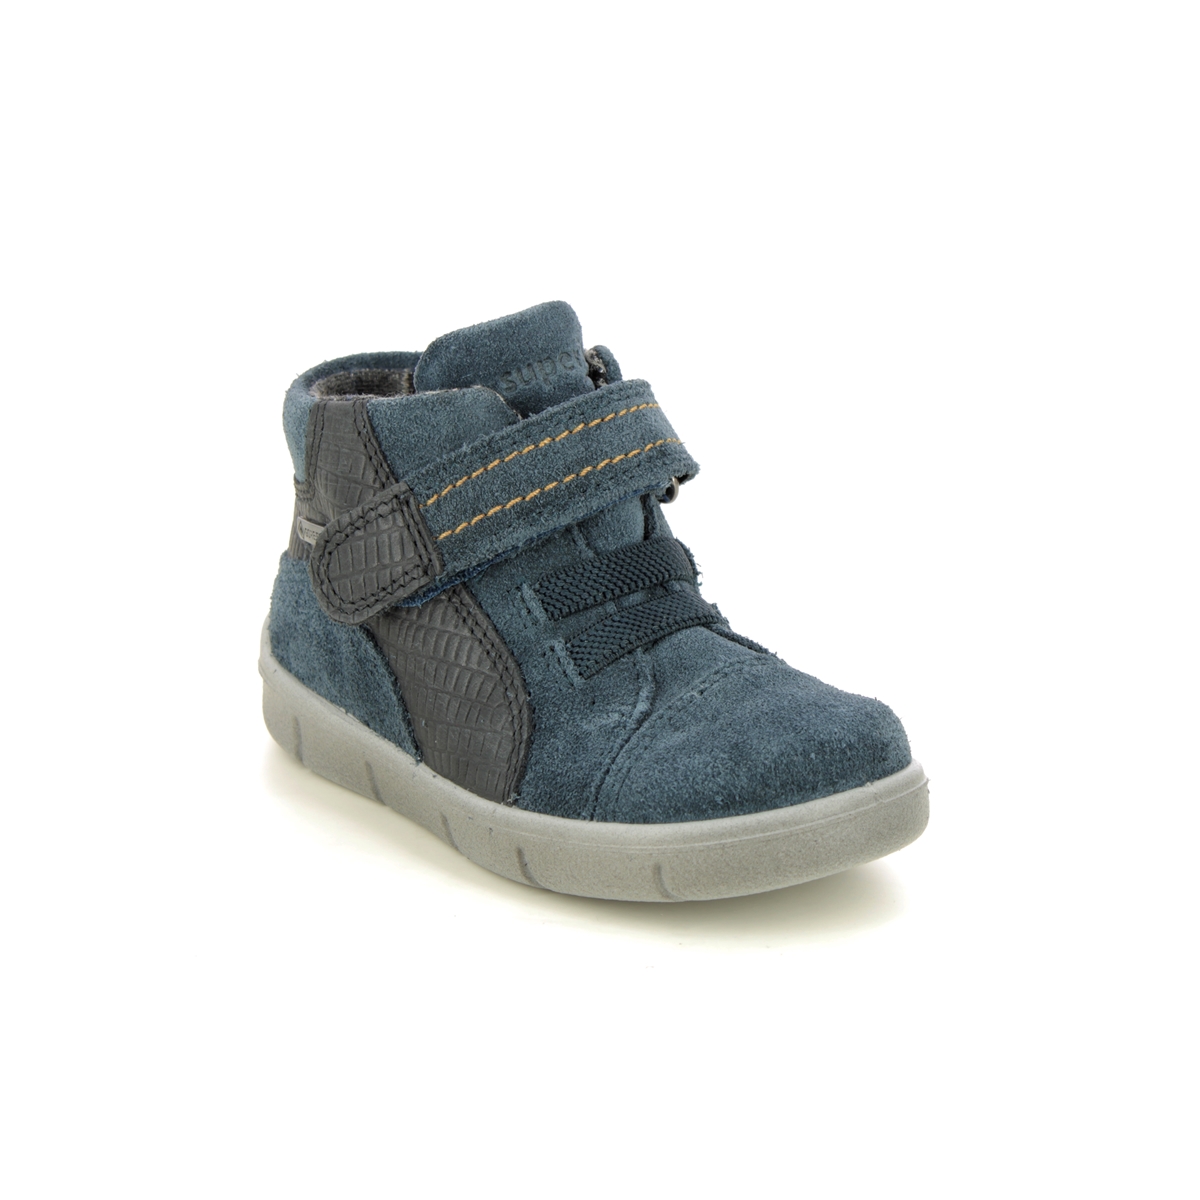 Superfit Ulli Bungee Gtx Blue Suede Kids Toddler Boys Boots 1009429-8000 In Size 28 In Plain Blue Suede For kids